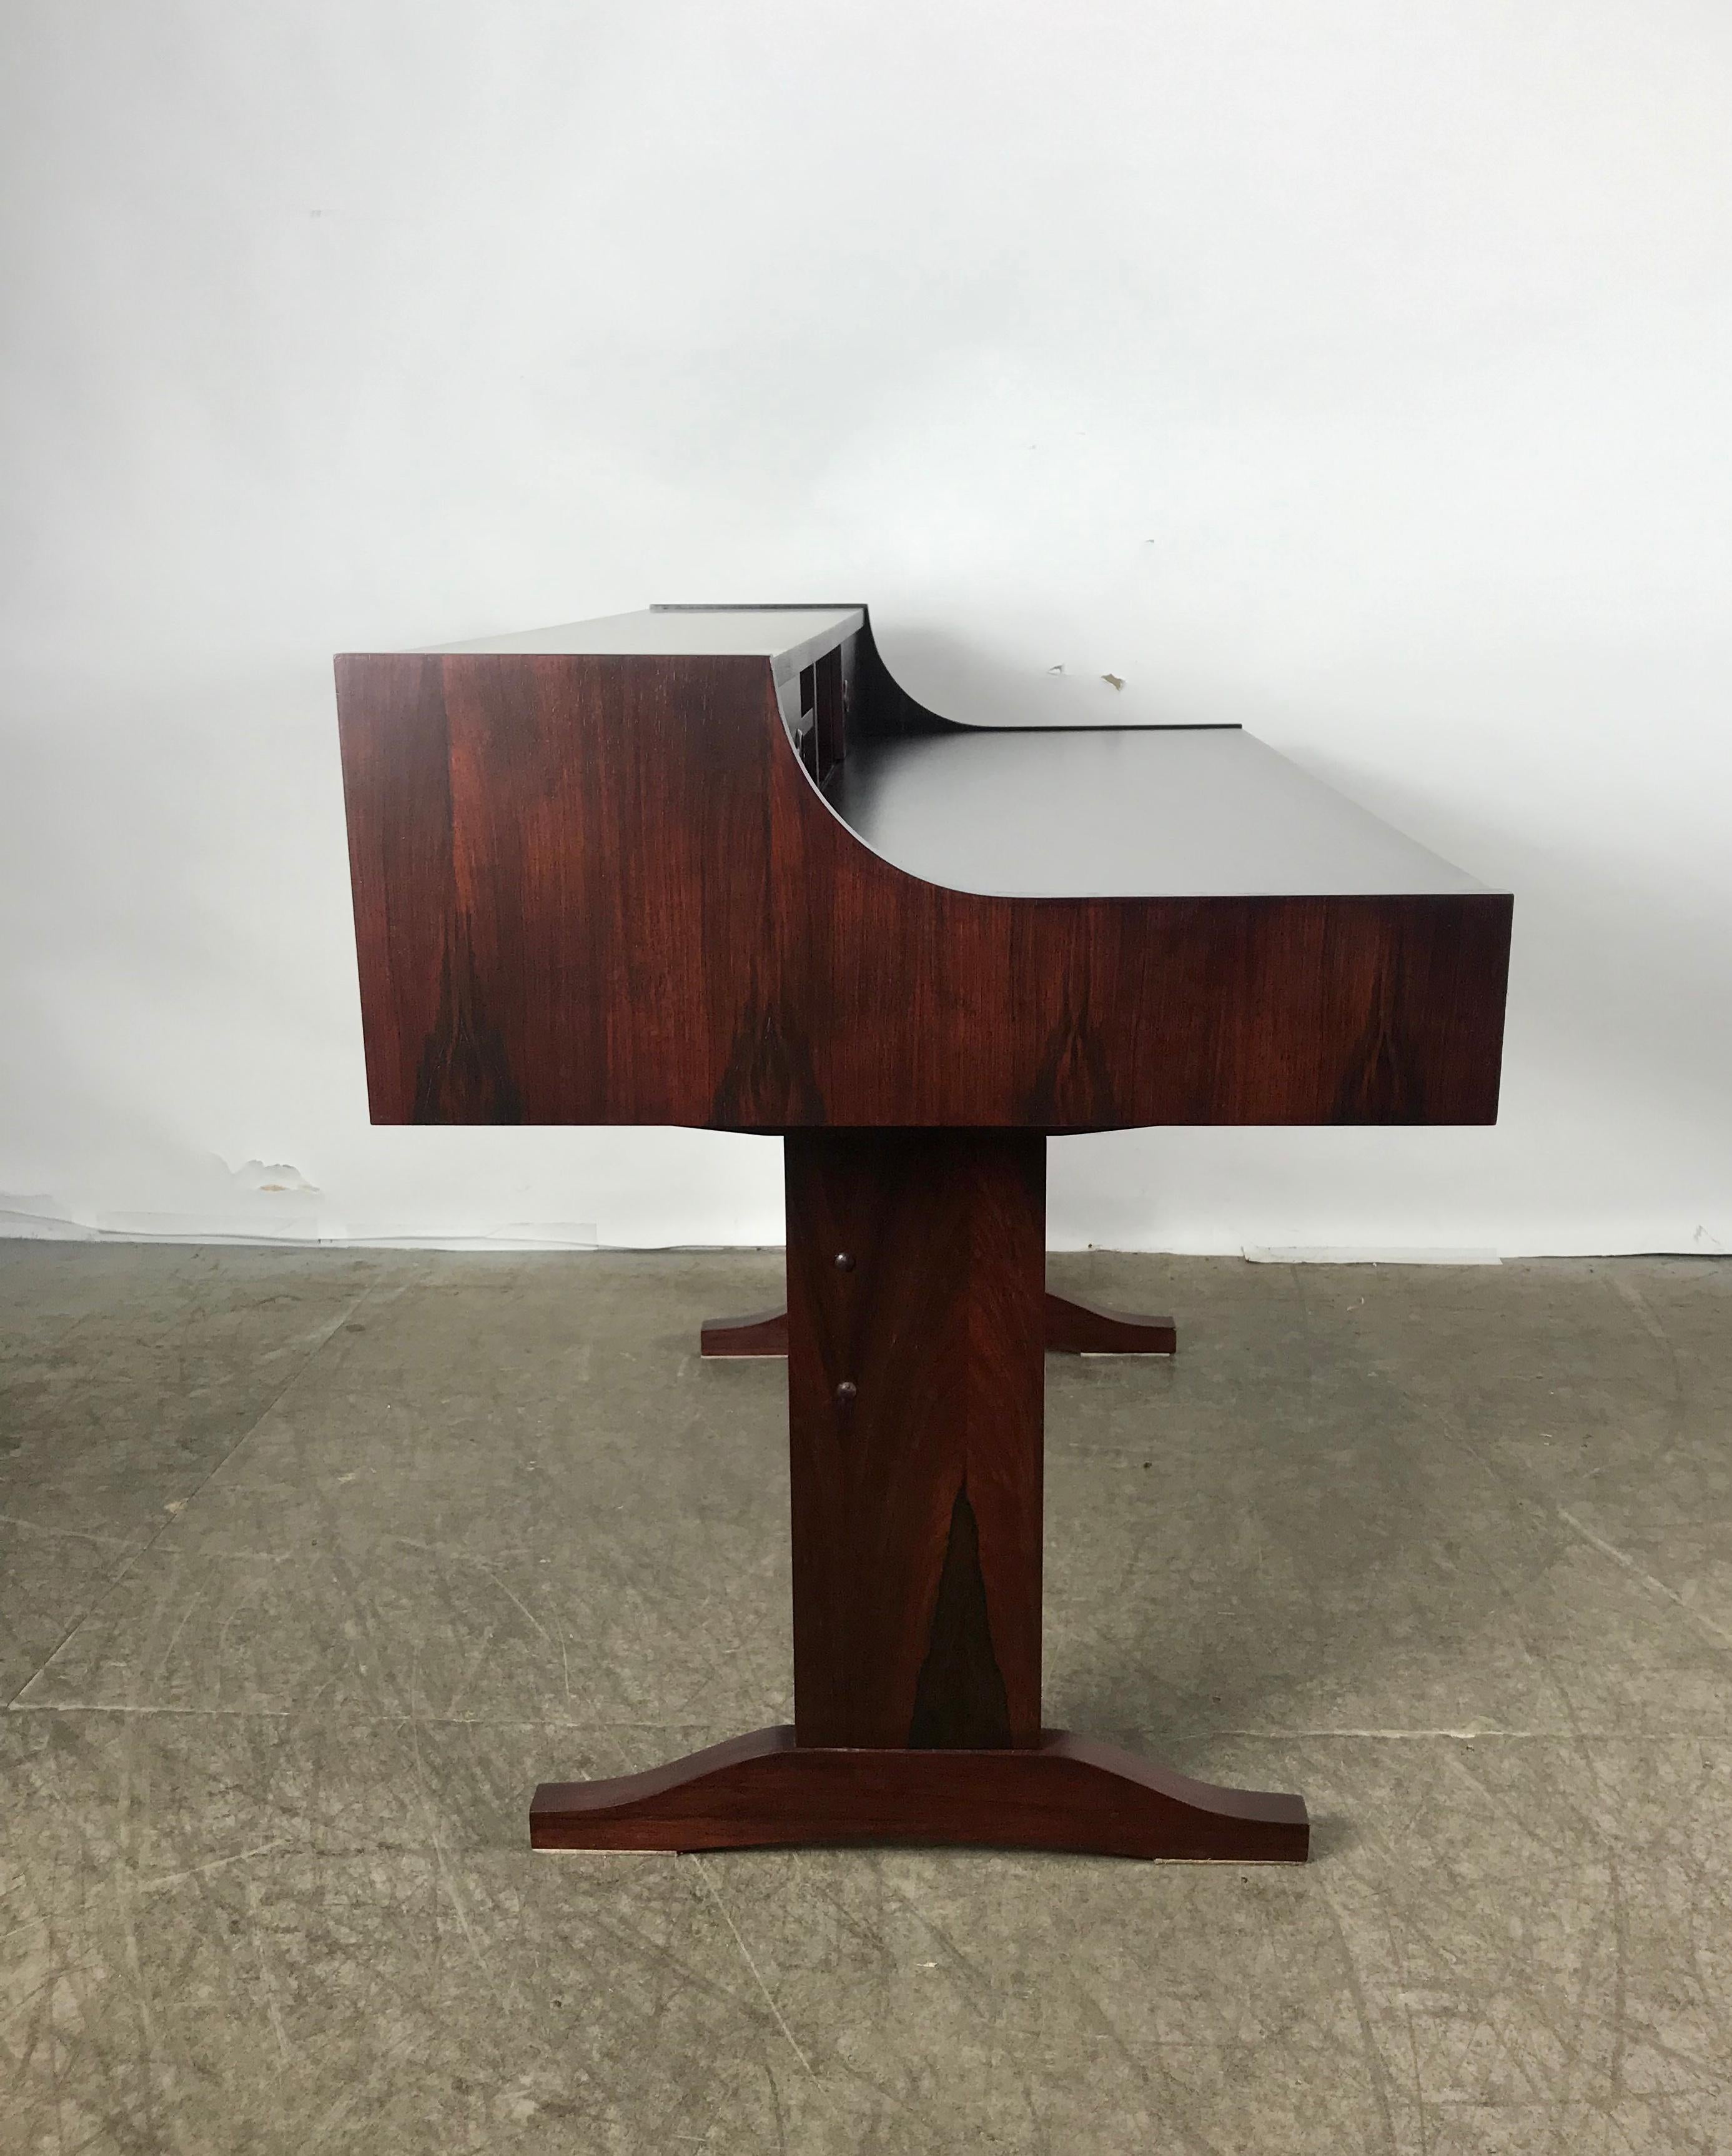 Stunning Danish modern Rosewood desk attributed to Peter Løvig Nielsen Dansk. Trestle design base. Generous work surface with two drawers. Step up cubbies with sliding doors. Professionally restored,refinished. Hand delivery avail to New York City